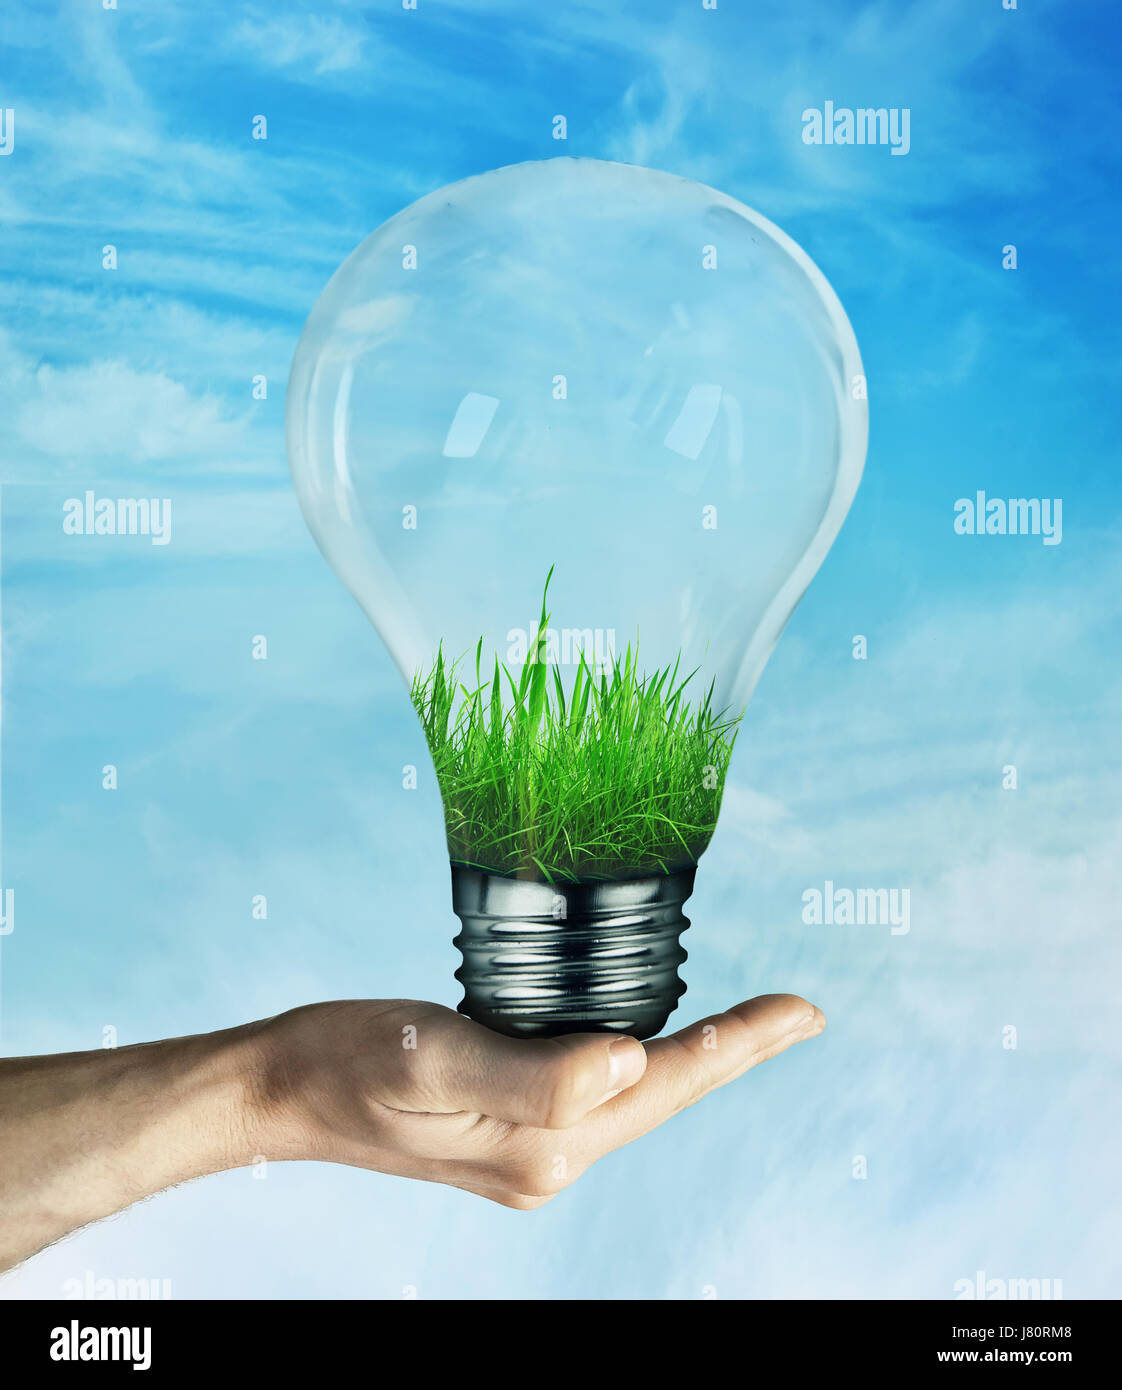 Human hand holding a light bulb, with green grass growing inside, on blue sky background. Energy saving concept, environmental friendly ecology. Stock Photo